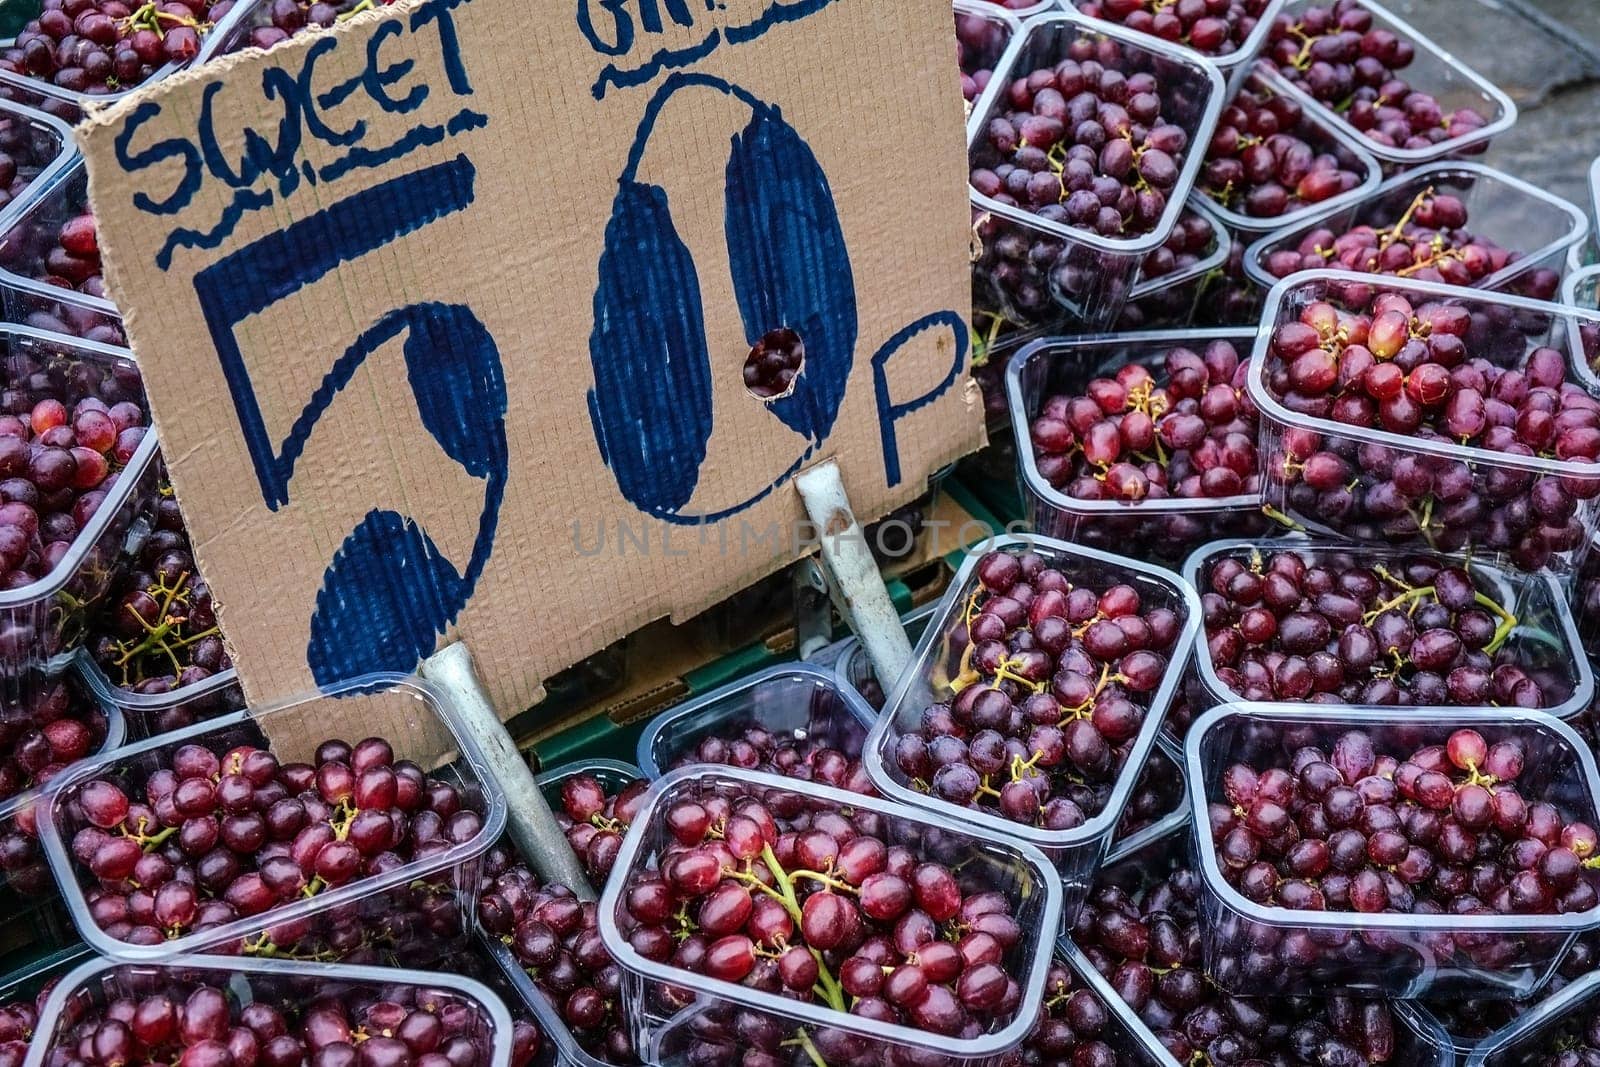 Small plastic boxes with red grapes displayed on food market at Lewisham, London by Ivanko